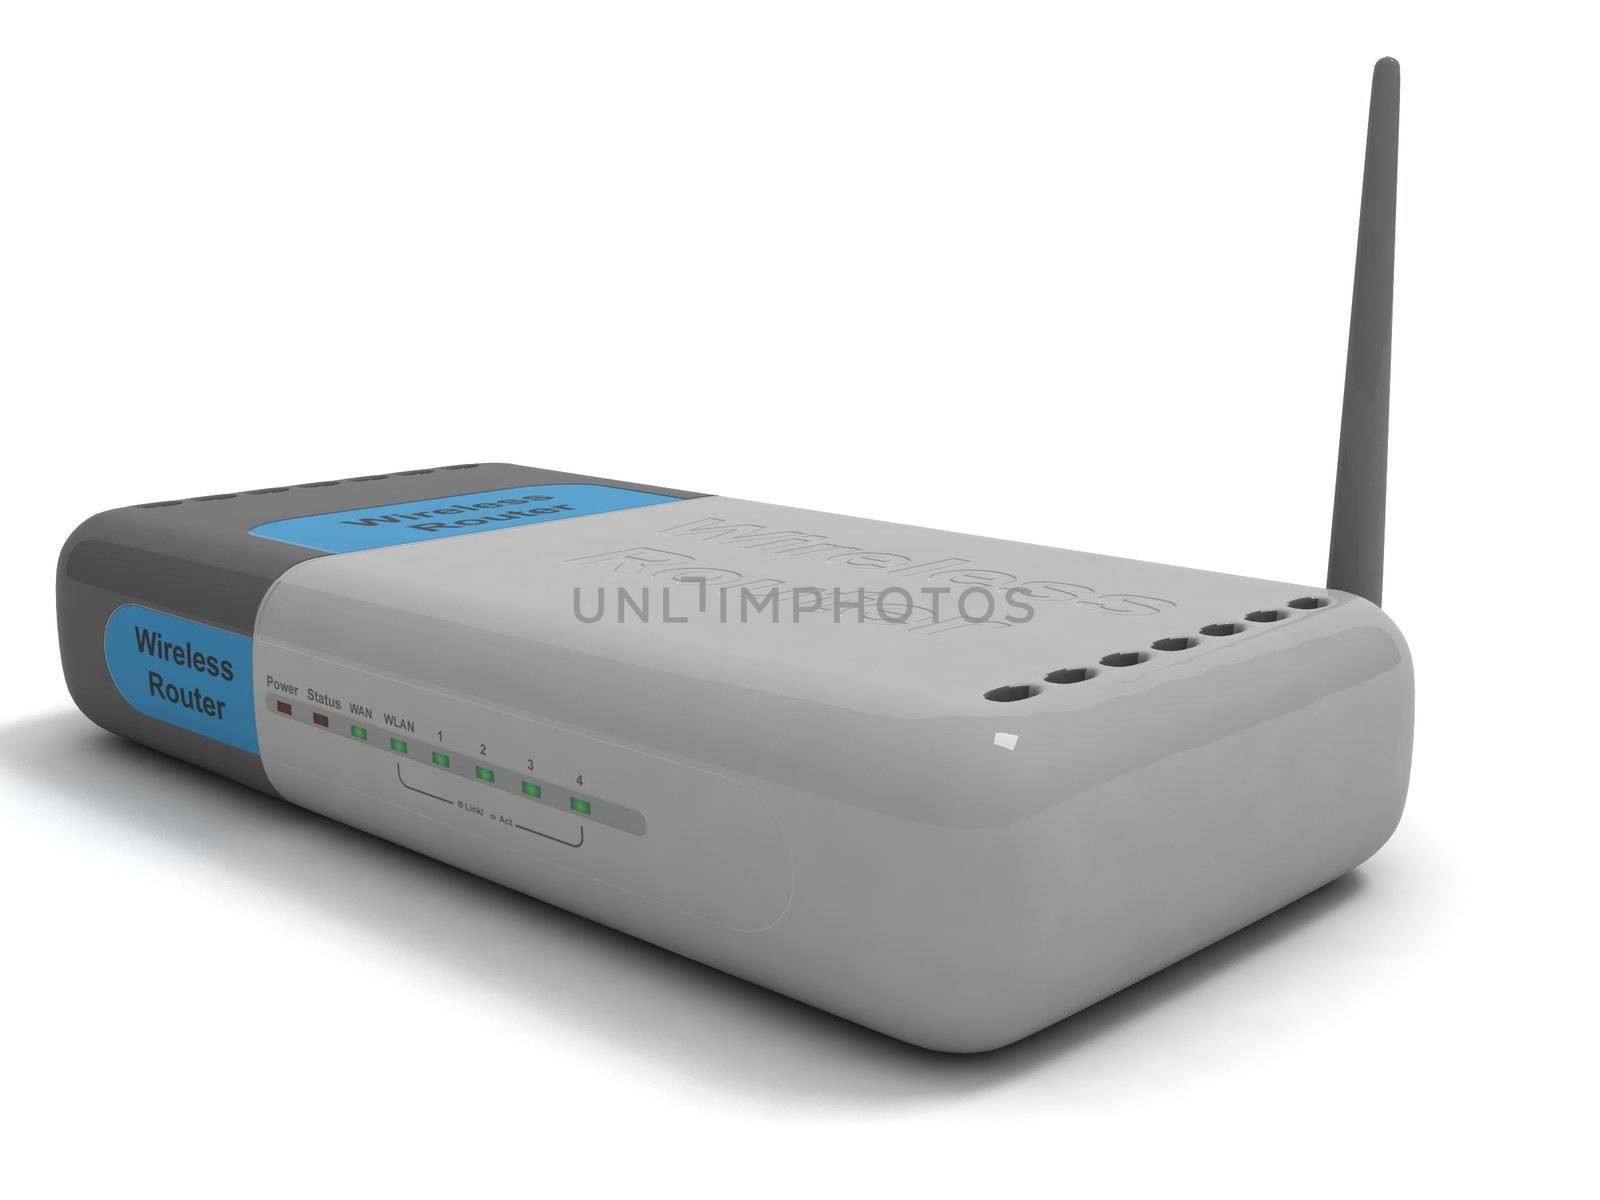 wireless network router by imagerymajestic